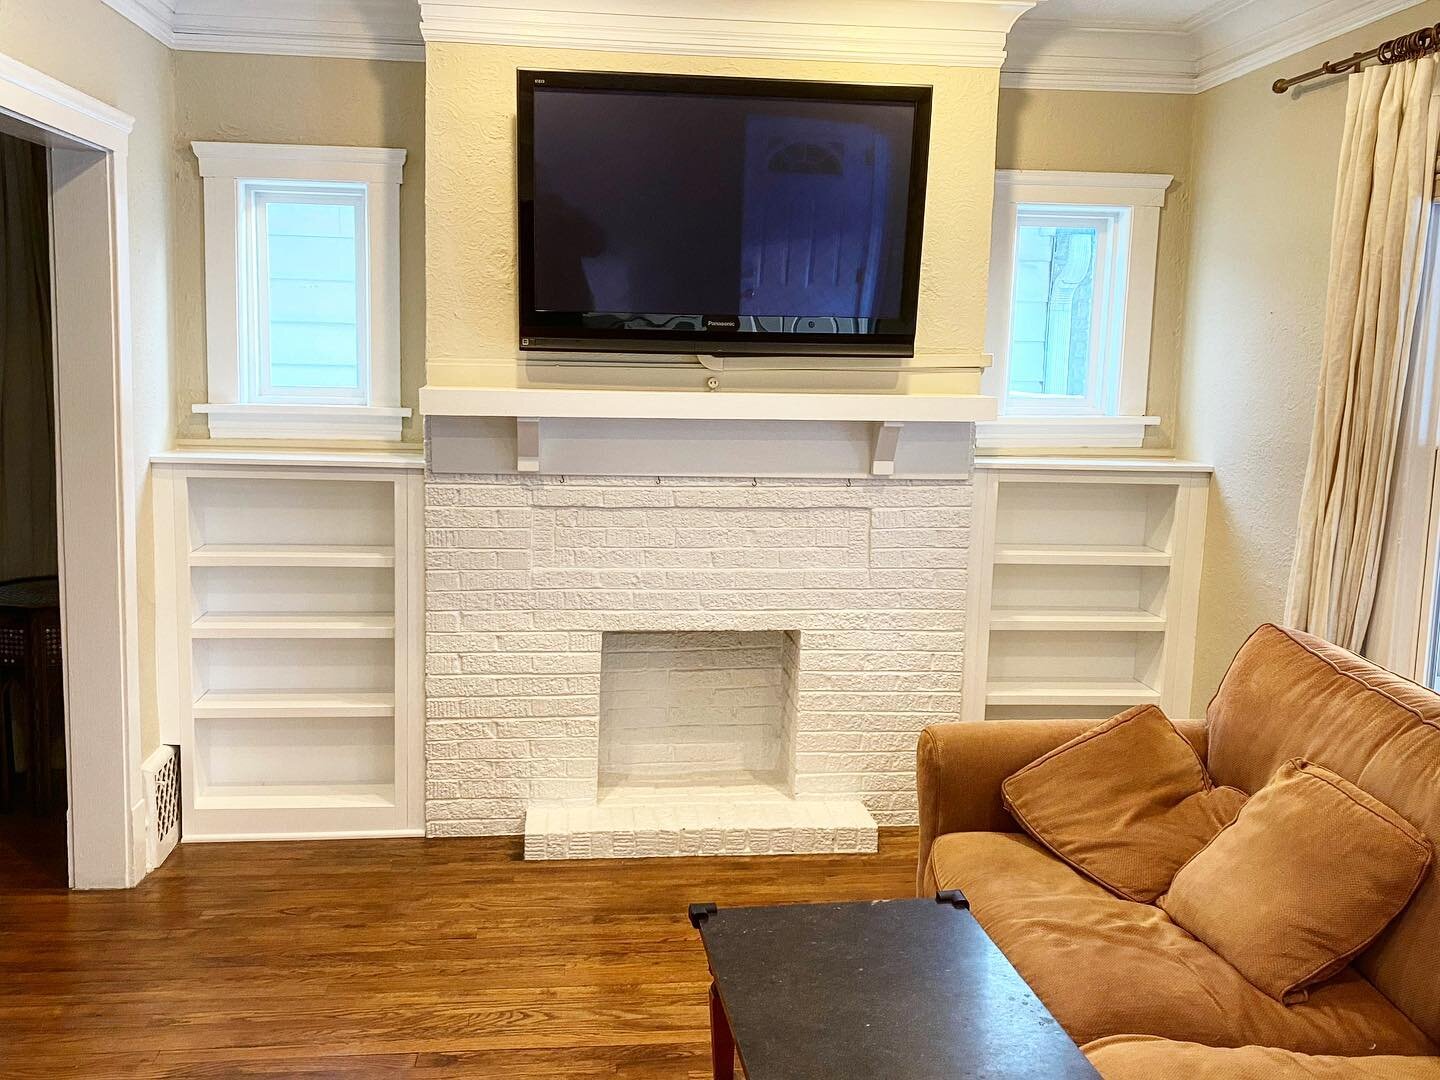 The other half of our recent Oak Park build. These bright white built-ins gave this small living room tons more storage with a clean design that helps the room feel light, airy, and clutter-free. Who wouldn&rsquo;t want that?

#custommade #customcarp